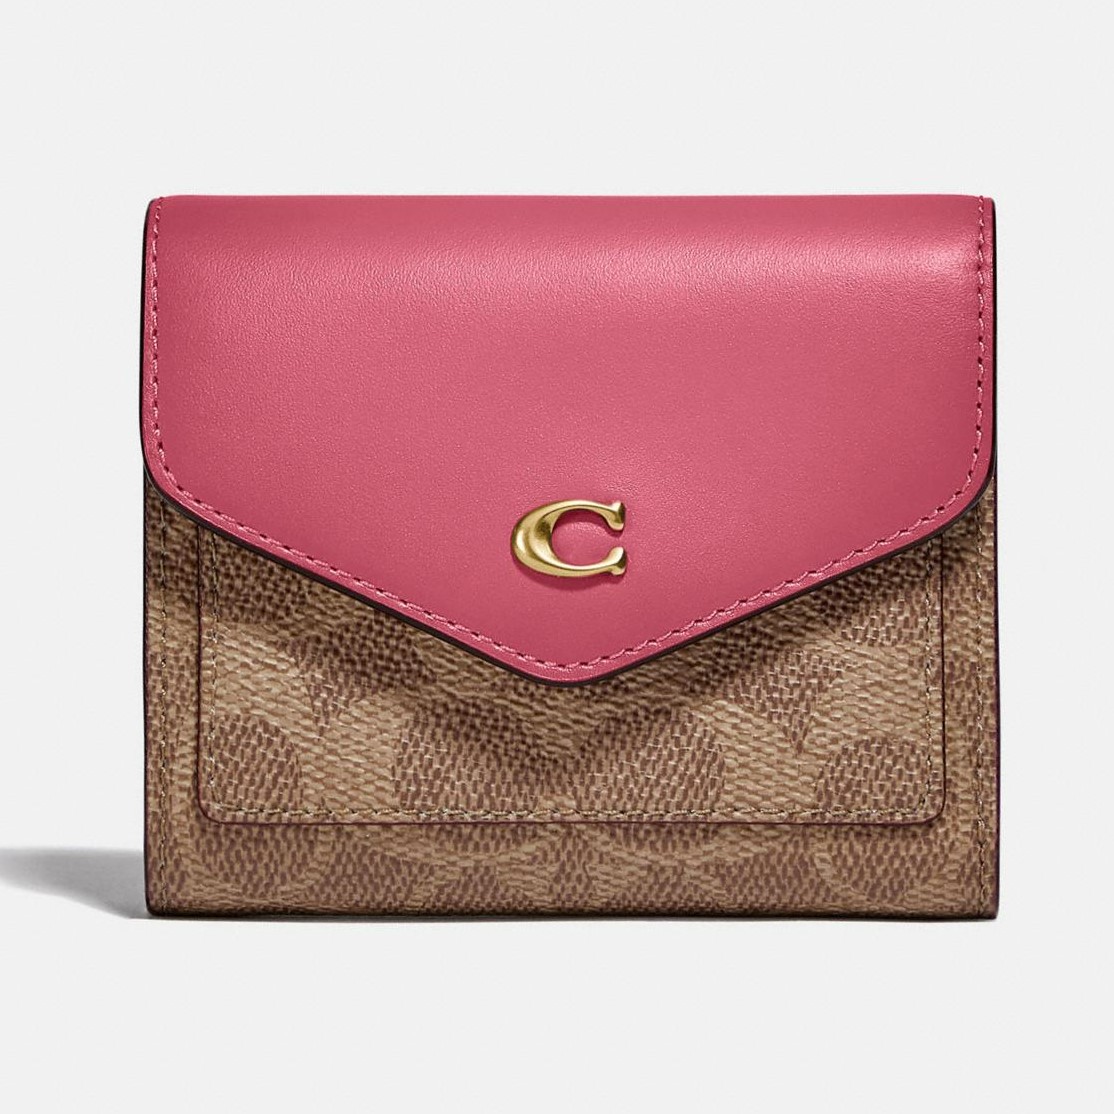 VÍ NỮ NGẮN NẤP GẬP COACH WYN SMALL WALLET IN COLORBLOCK SIGNATURE CANVAS C2329 7